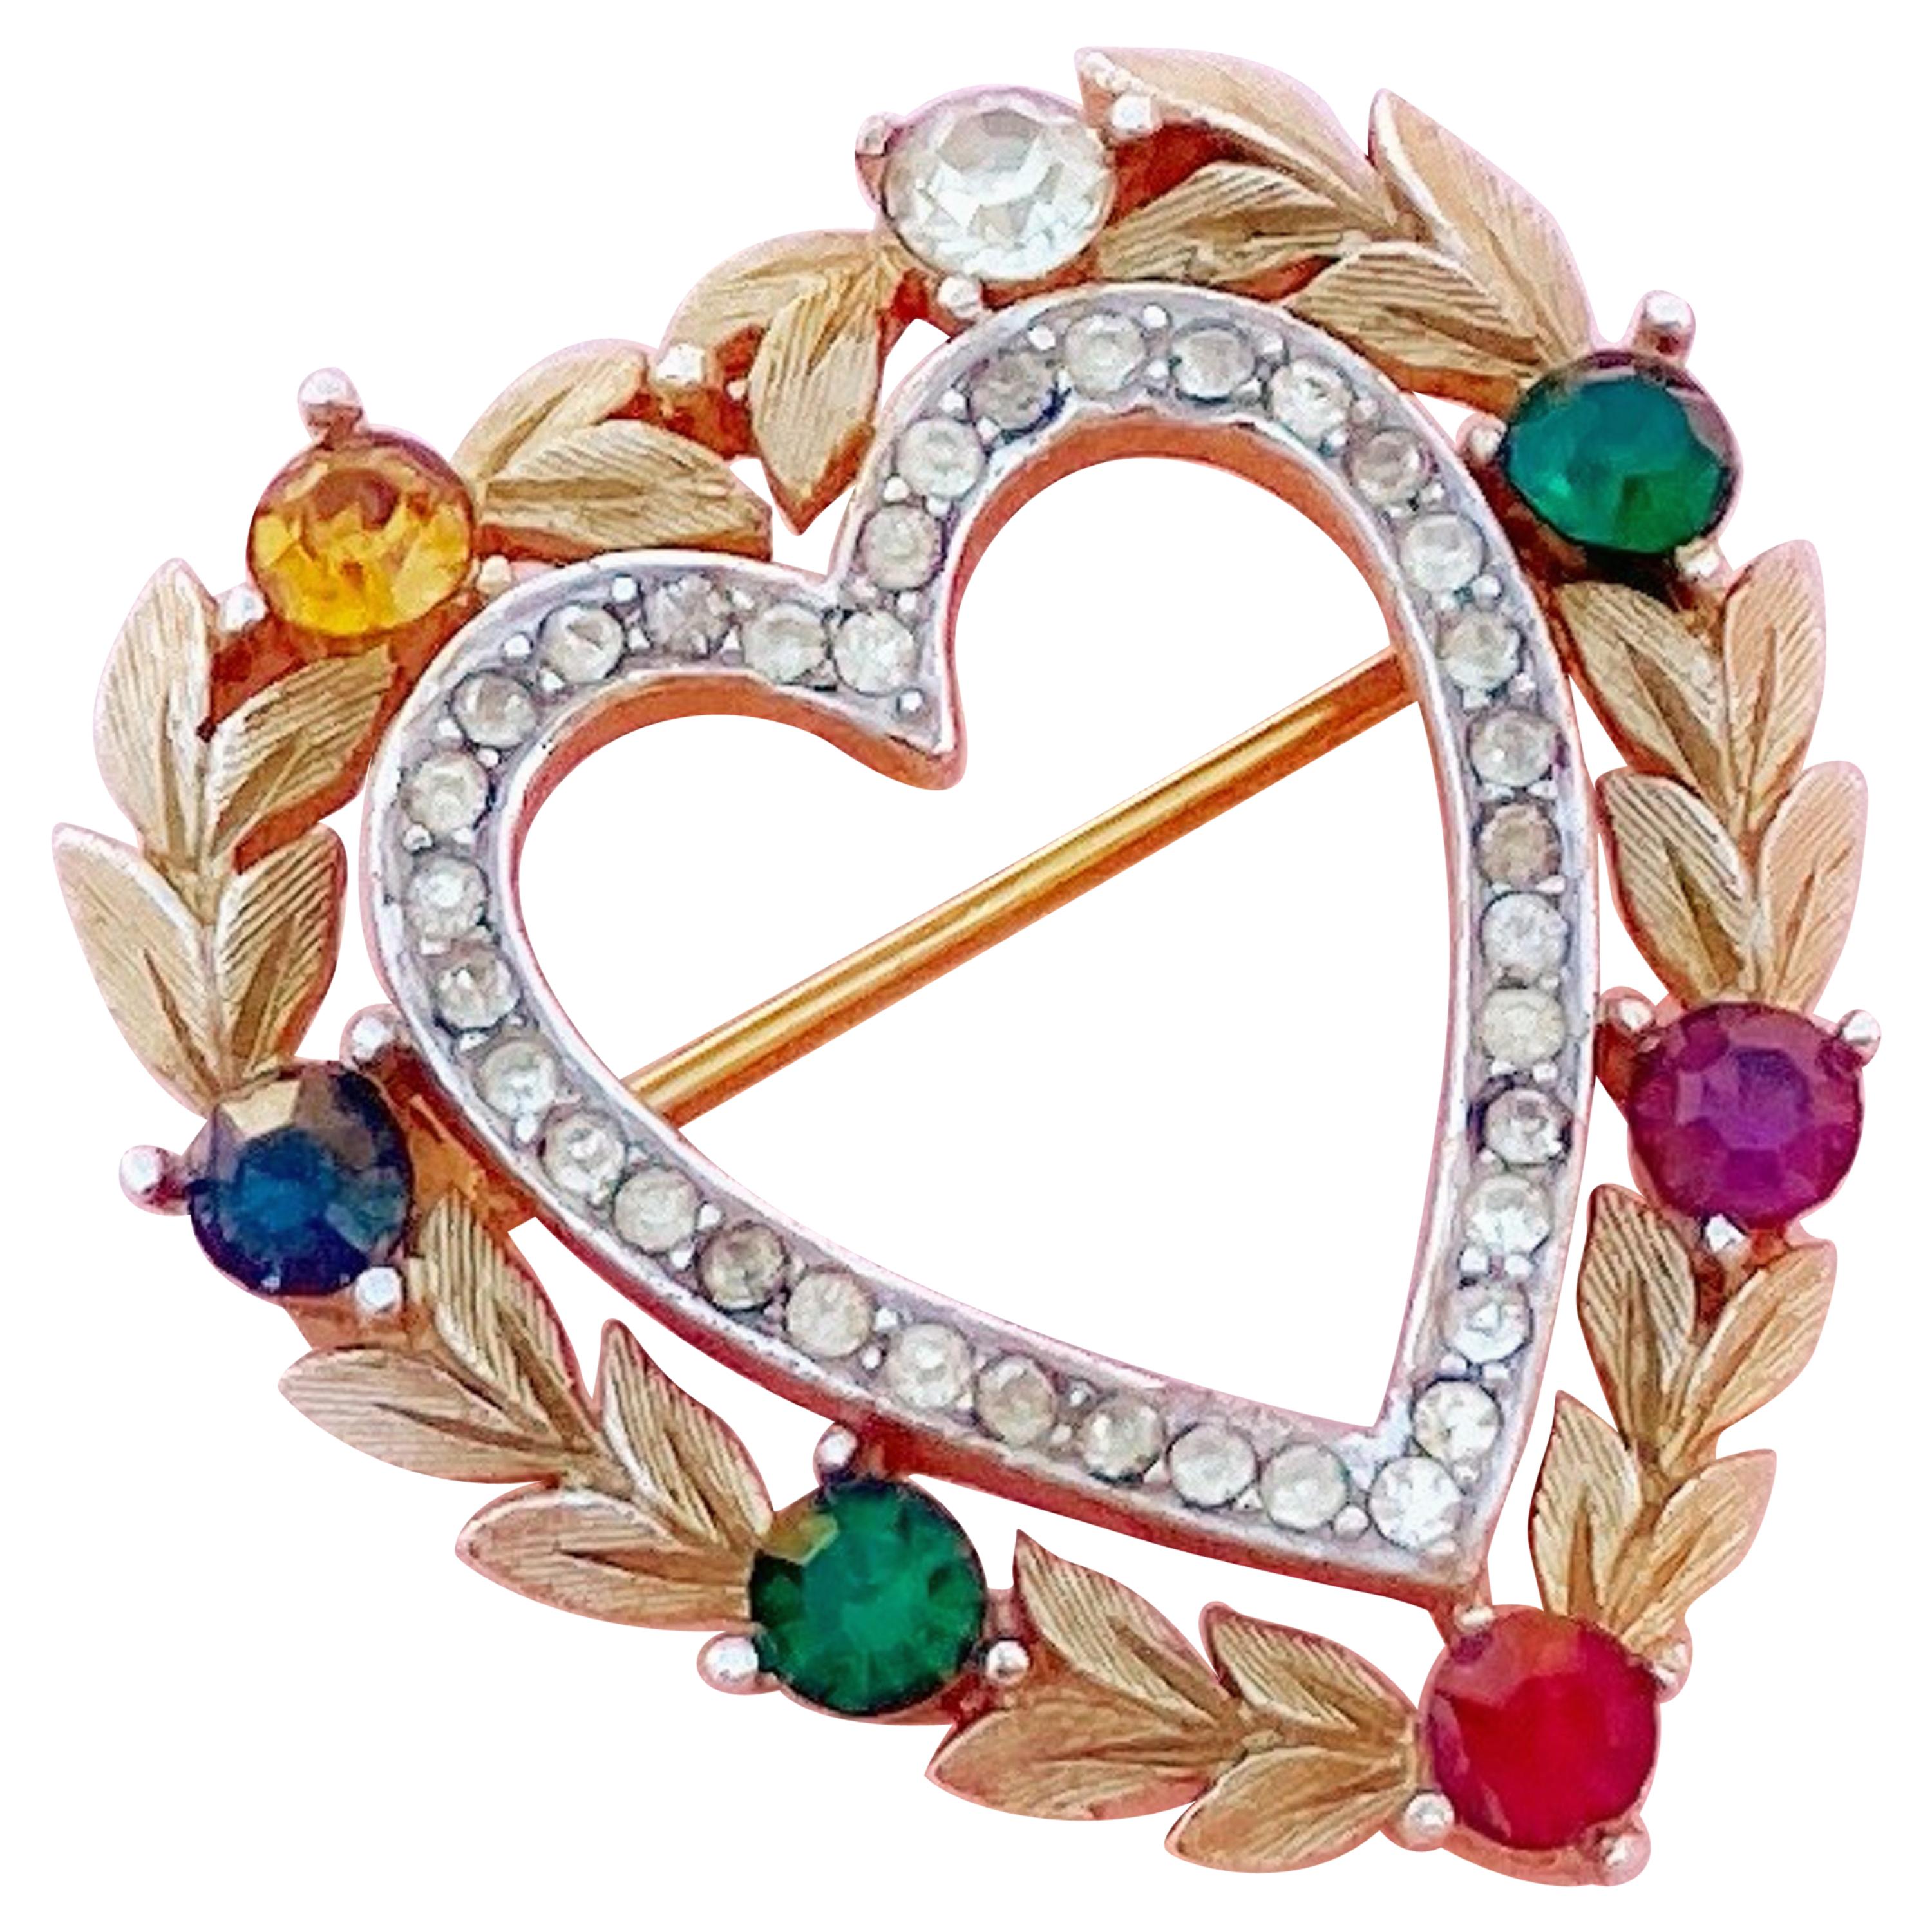 Gilded "DEAREST" Heart Brooch with Simulated Gemstones by Crown Trifari, 1950s